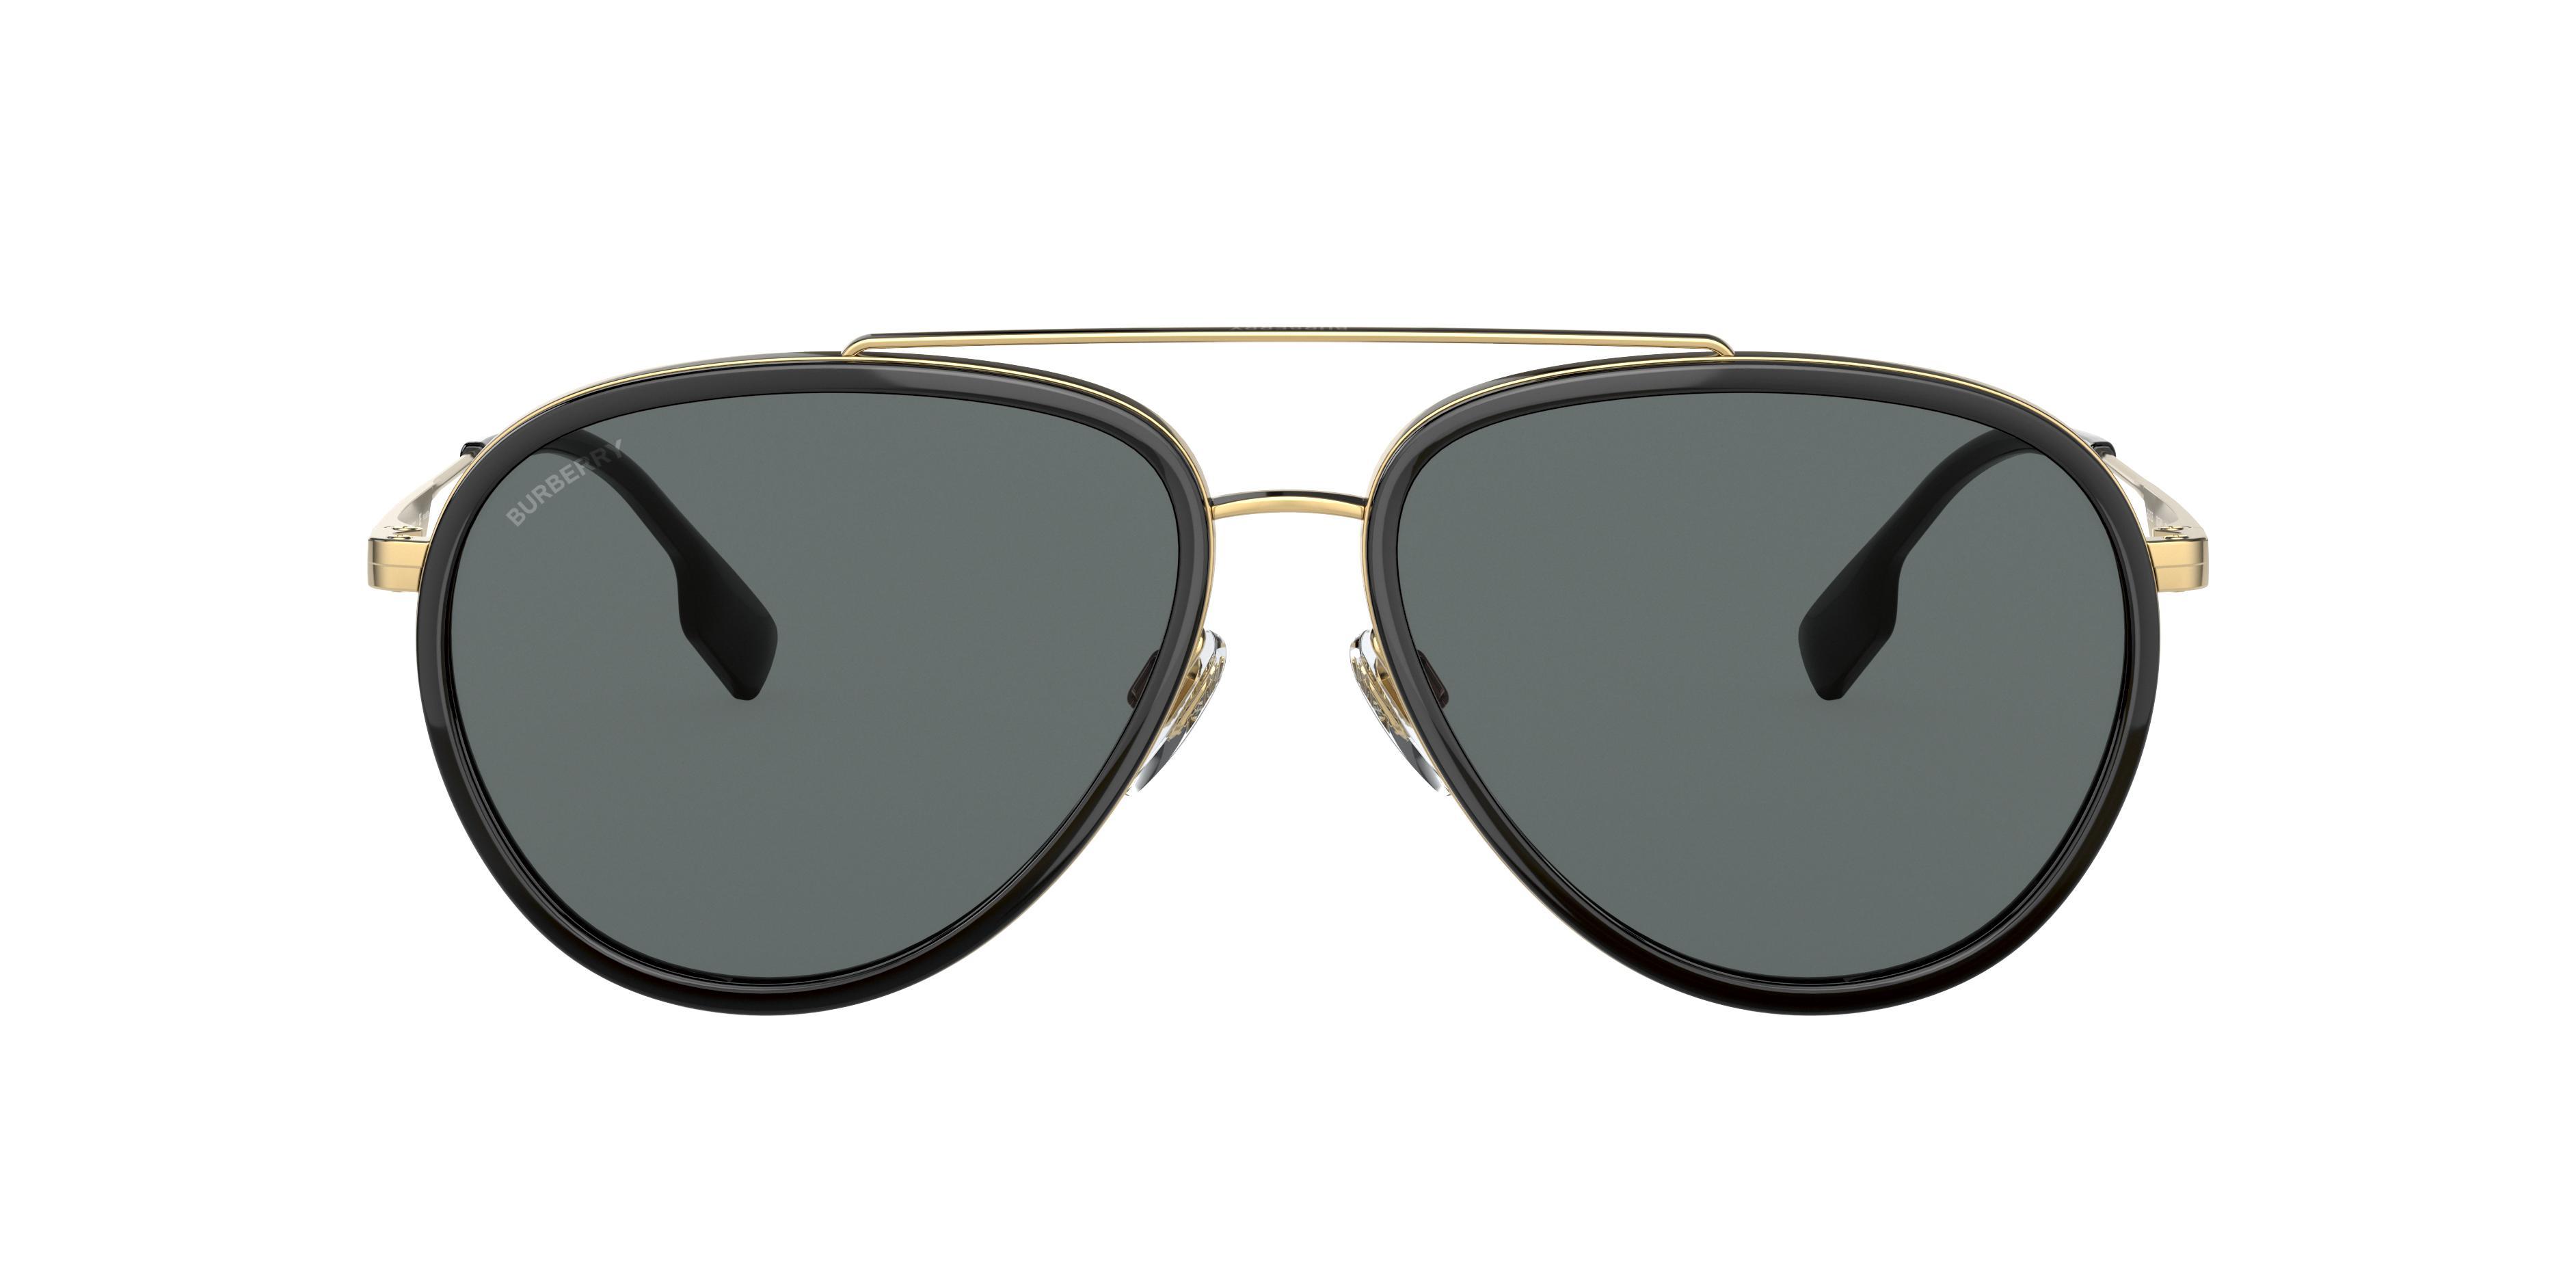 Burberry Mens Oliver Sunglasses, BE3125 59 Product Image